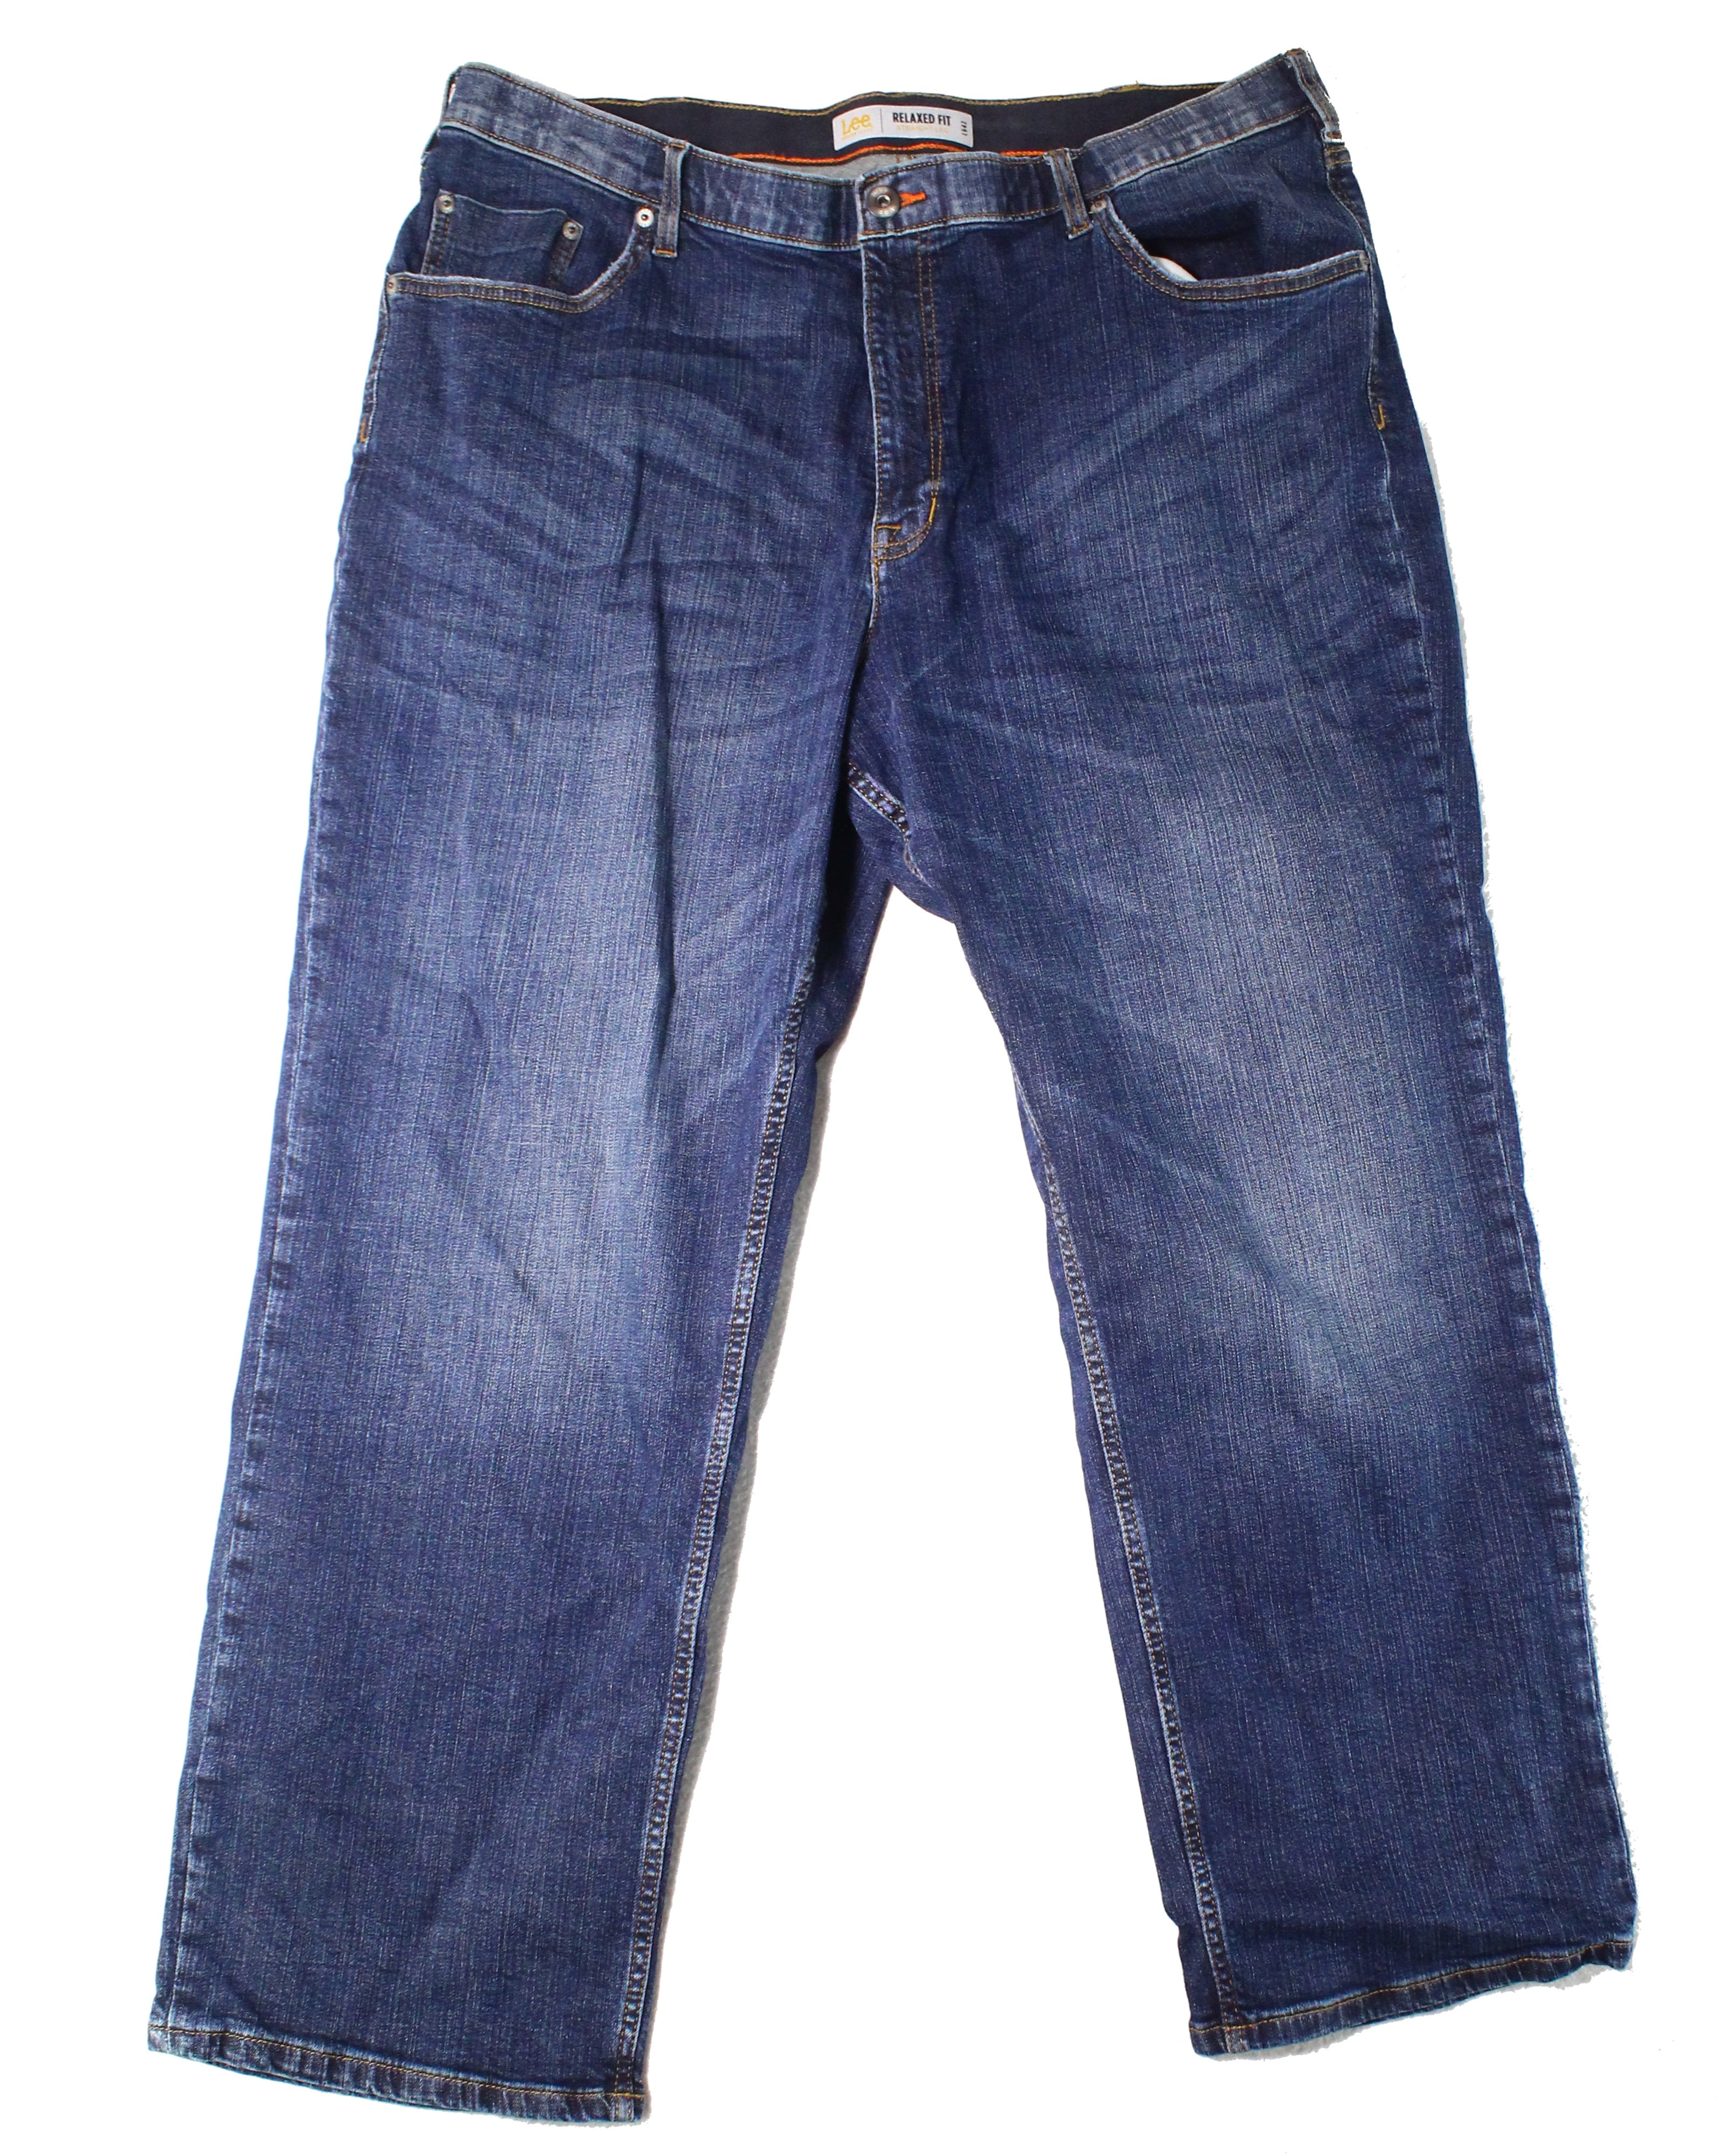 Lee - Mens Jeans 44x30 Relaxed Fit Classic Straight Leg Stretch 44 ...